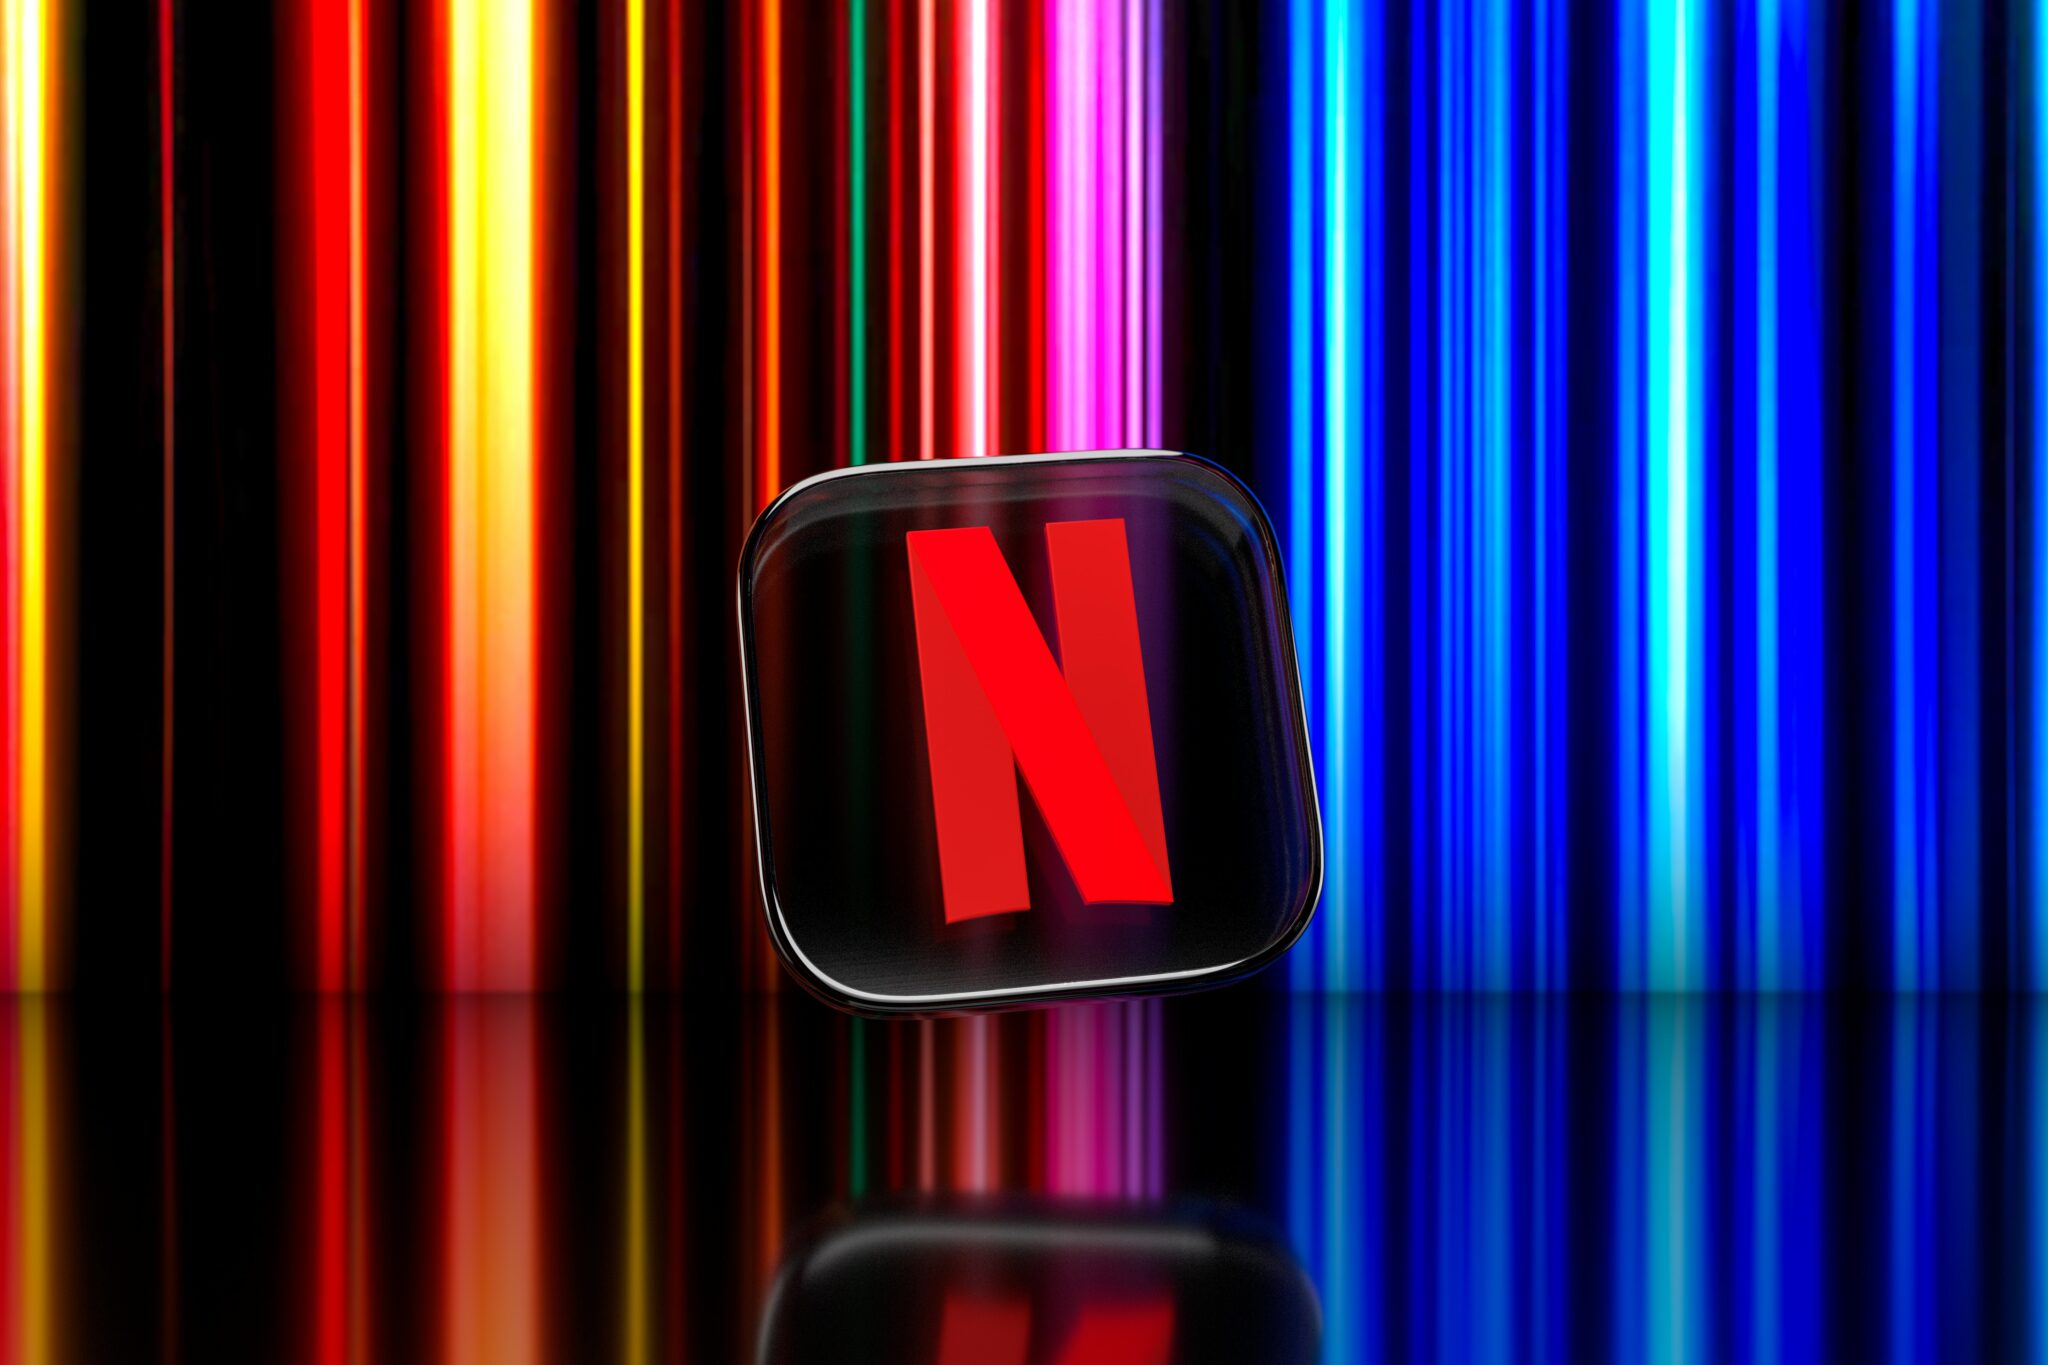 Netflix working on live streaming capabilities